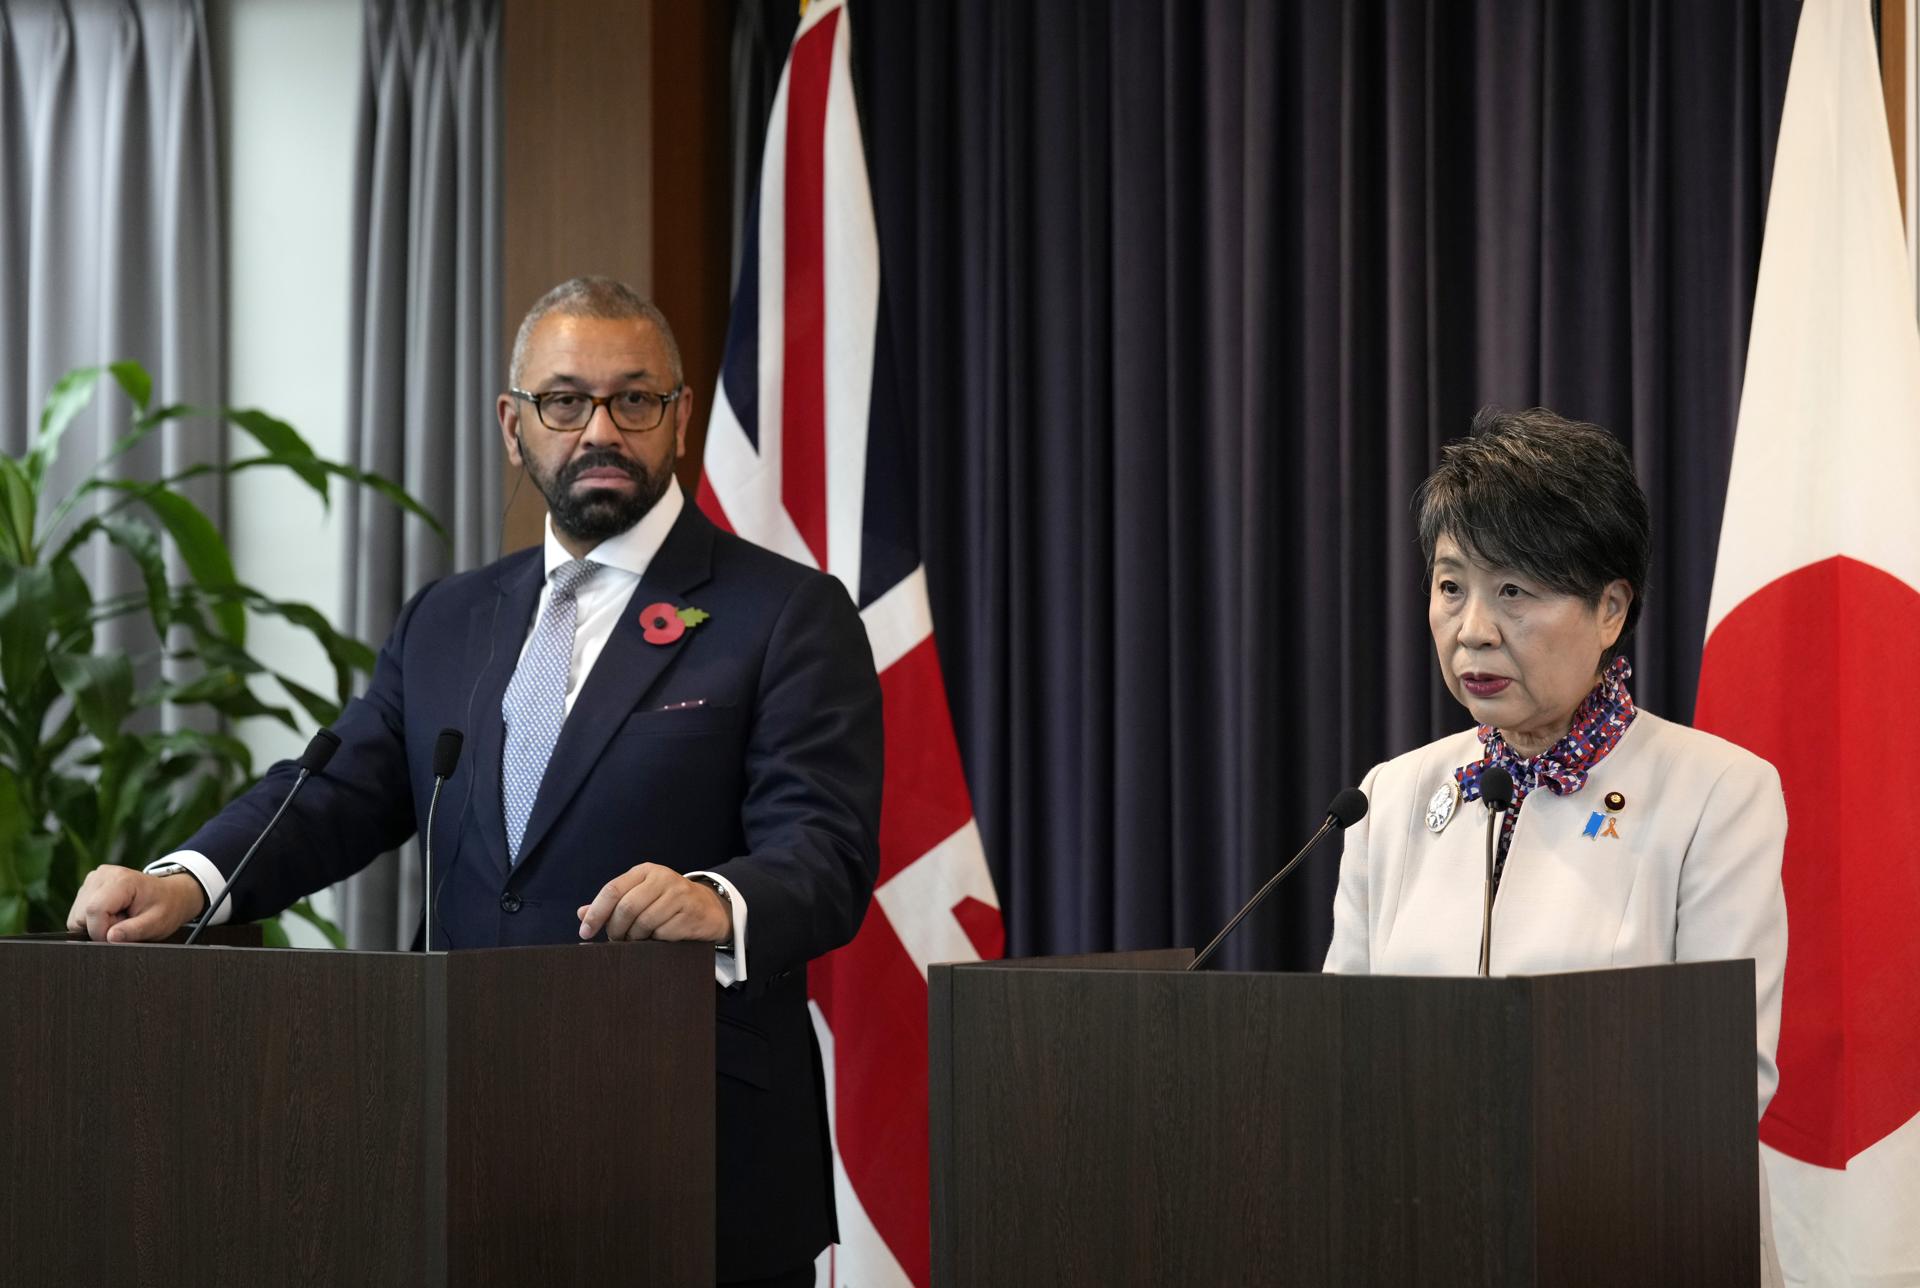 British Foreign Secretary James Cleverly (L) listens to Japanese Foreign Minister Yoko Kamikawa delivering a statement during a joint press announcement with British Secretary of State for Defence Grant Shapps and Japanese Defence Minister Minoru Kihara (not pictured) after their meeting at the Foreign Ministry in Tokyo, Japan, 07 November 2023. EFE-EPA/FRANCK ROBICHON / POOL
